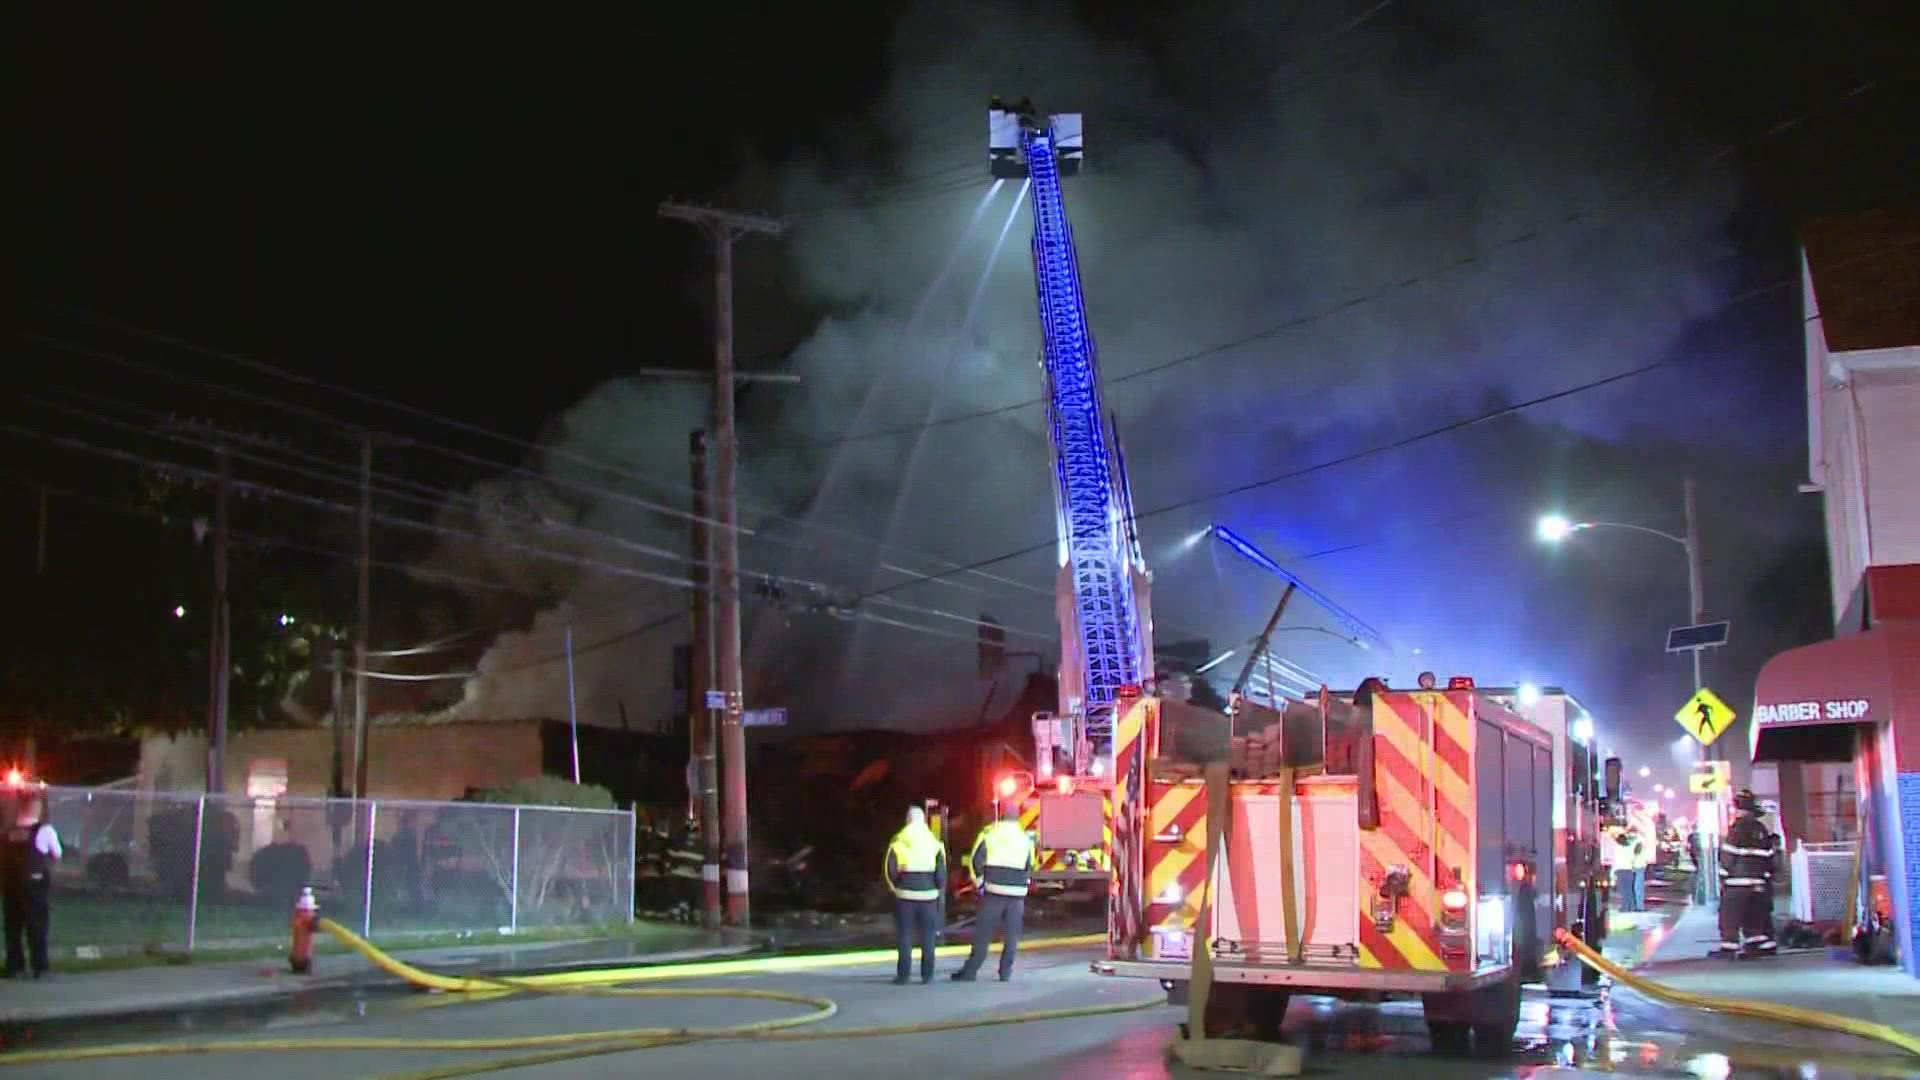 The fire broke out near the intersection of West 46th Street and Clark.